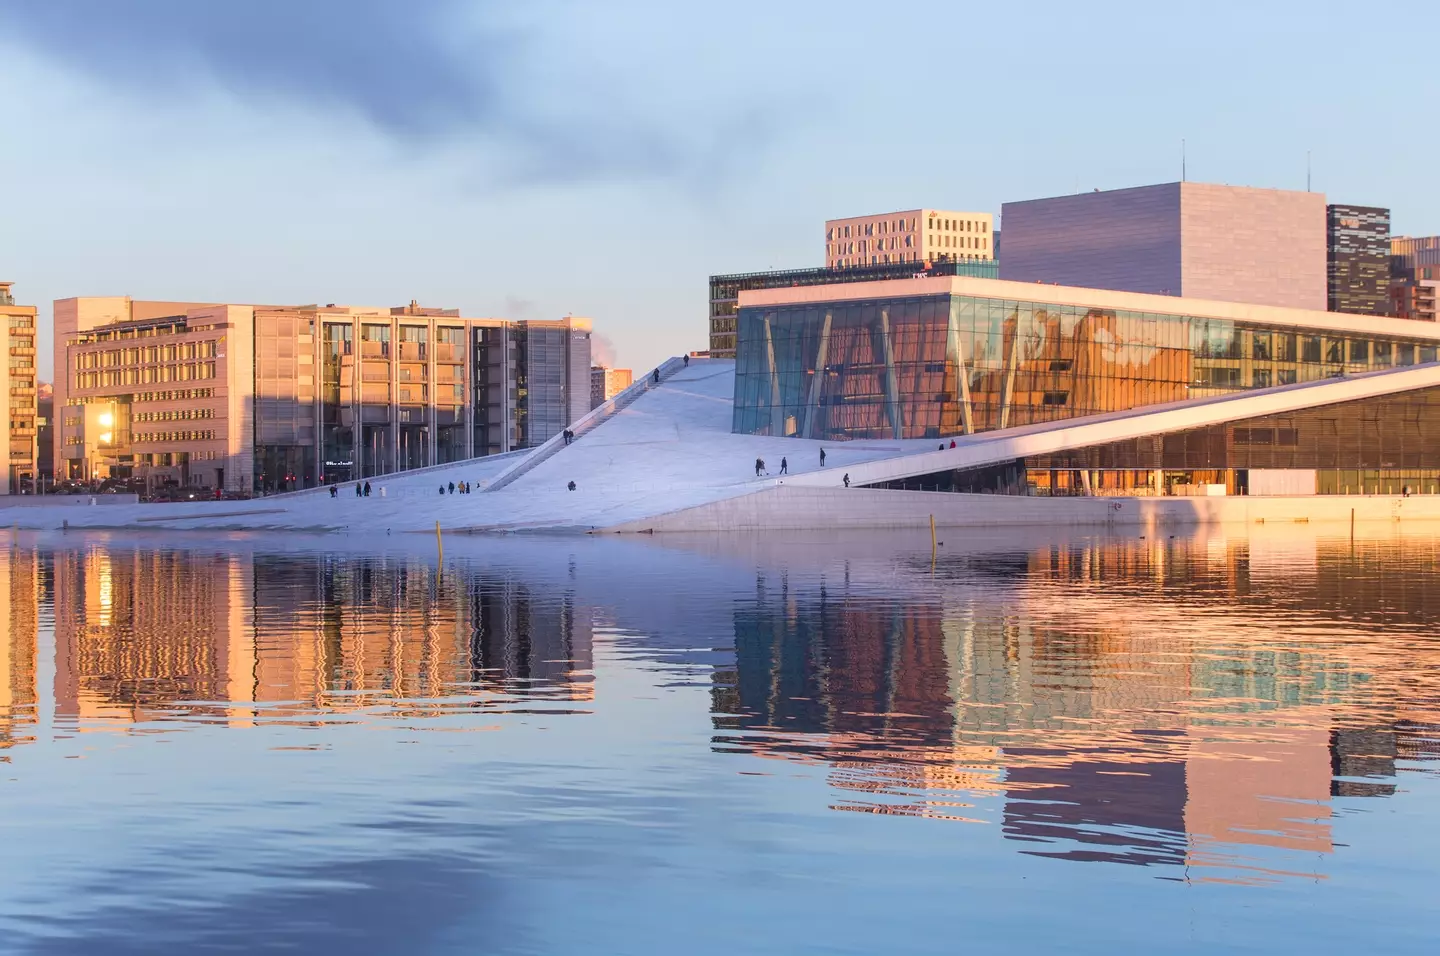 The Oslo Opera House that can you walk on top of.